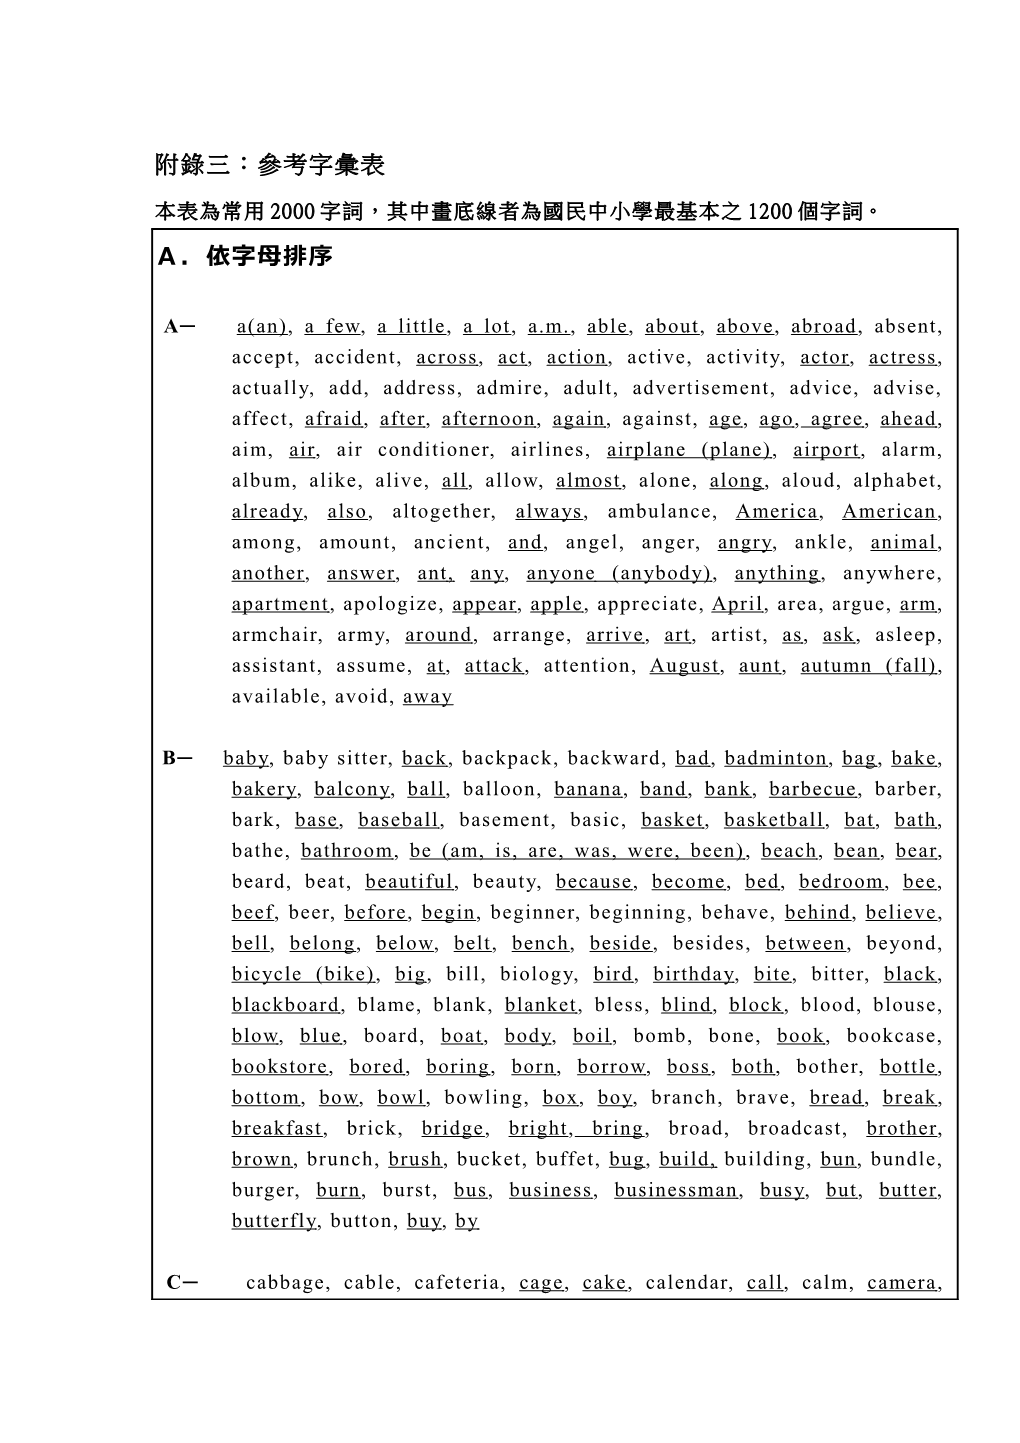 Be動詞和助動詞do, Have, Can, Will, May只列原形 其相關衍生詞均列在其後括弧內 如be (Am, Are, Is, Was, Were, Been)